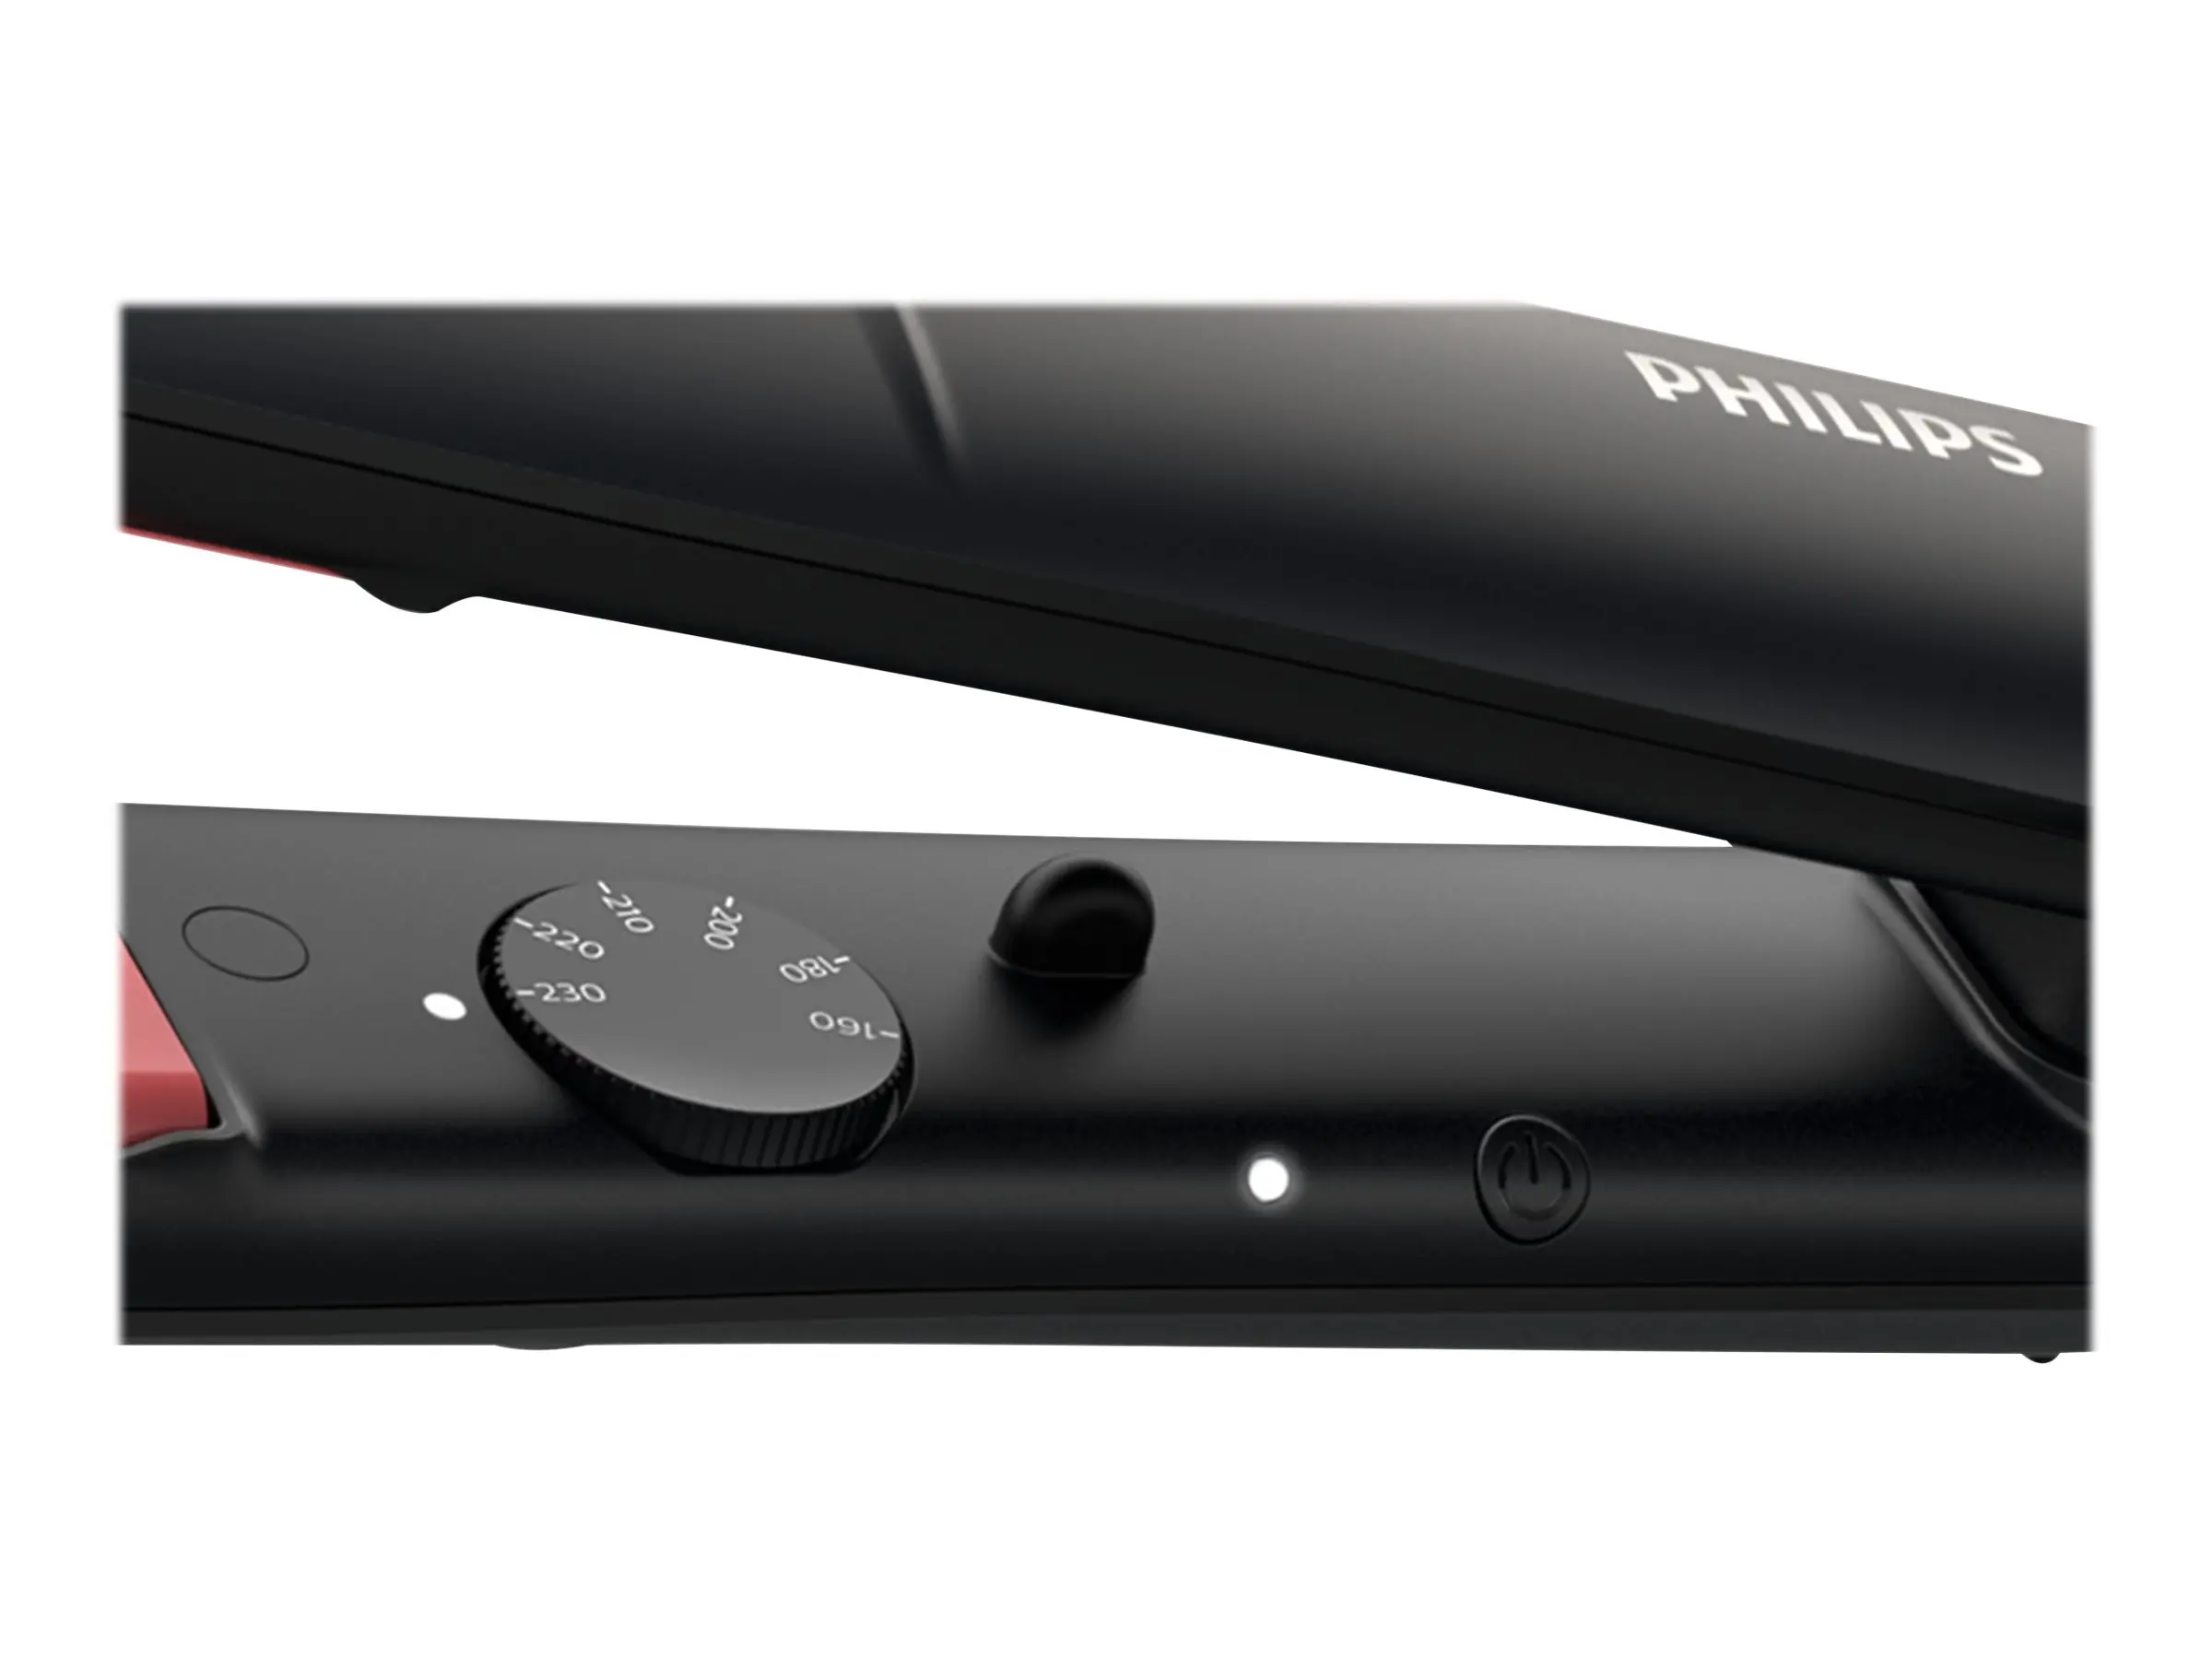 PHILIPS BHS376/00 Hair straightener ThermoProtect - image 11